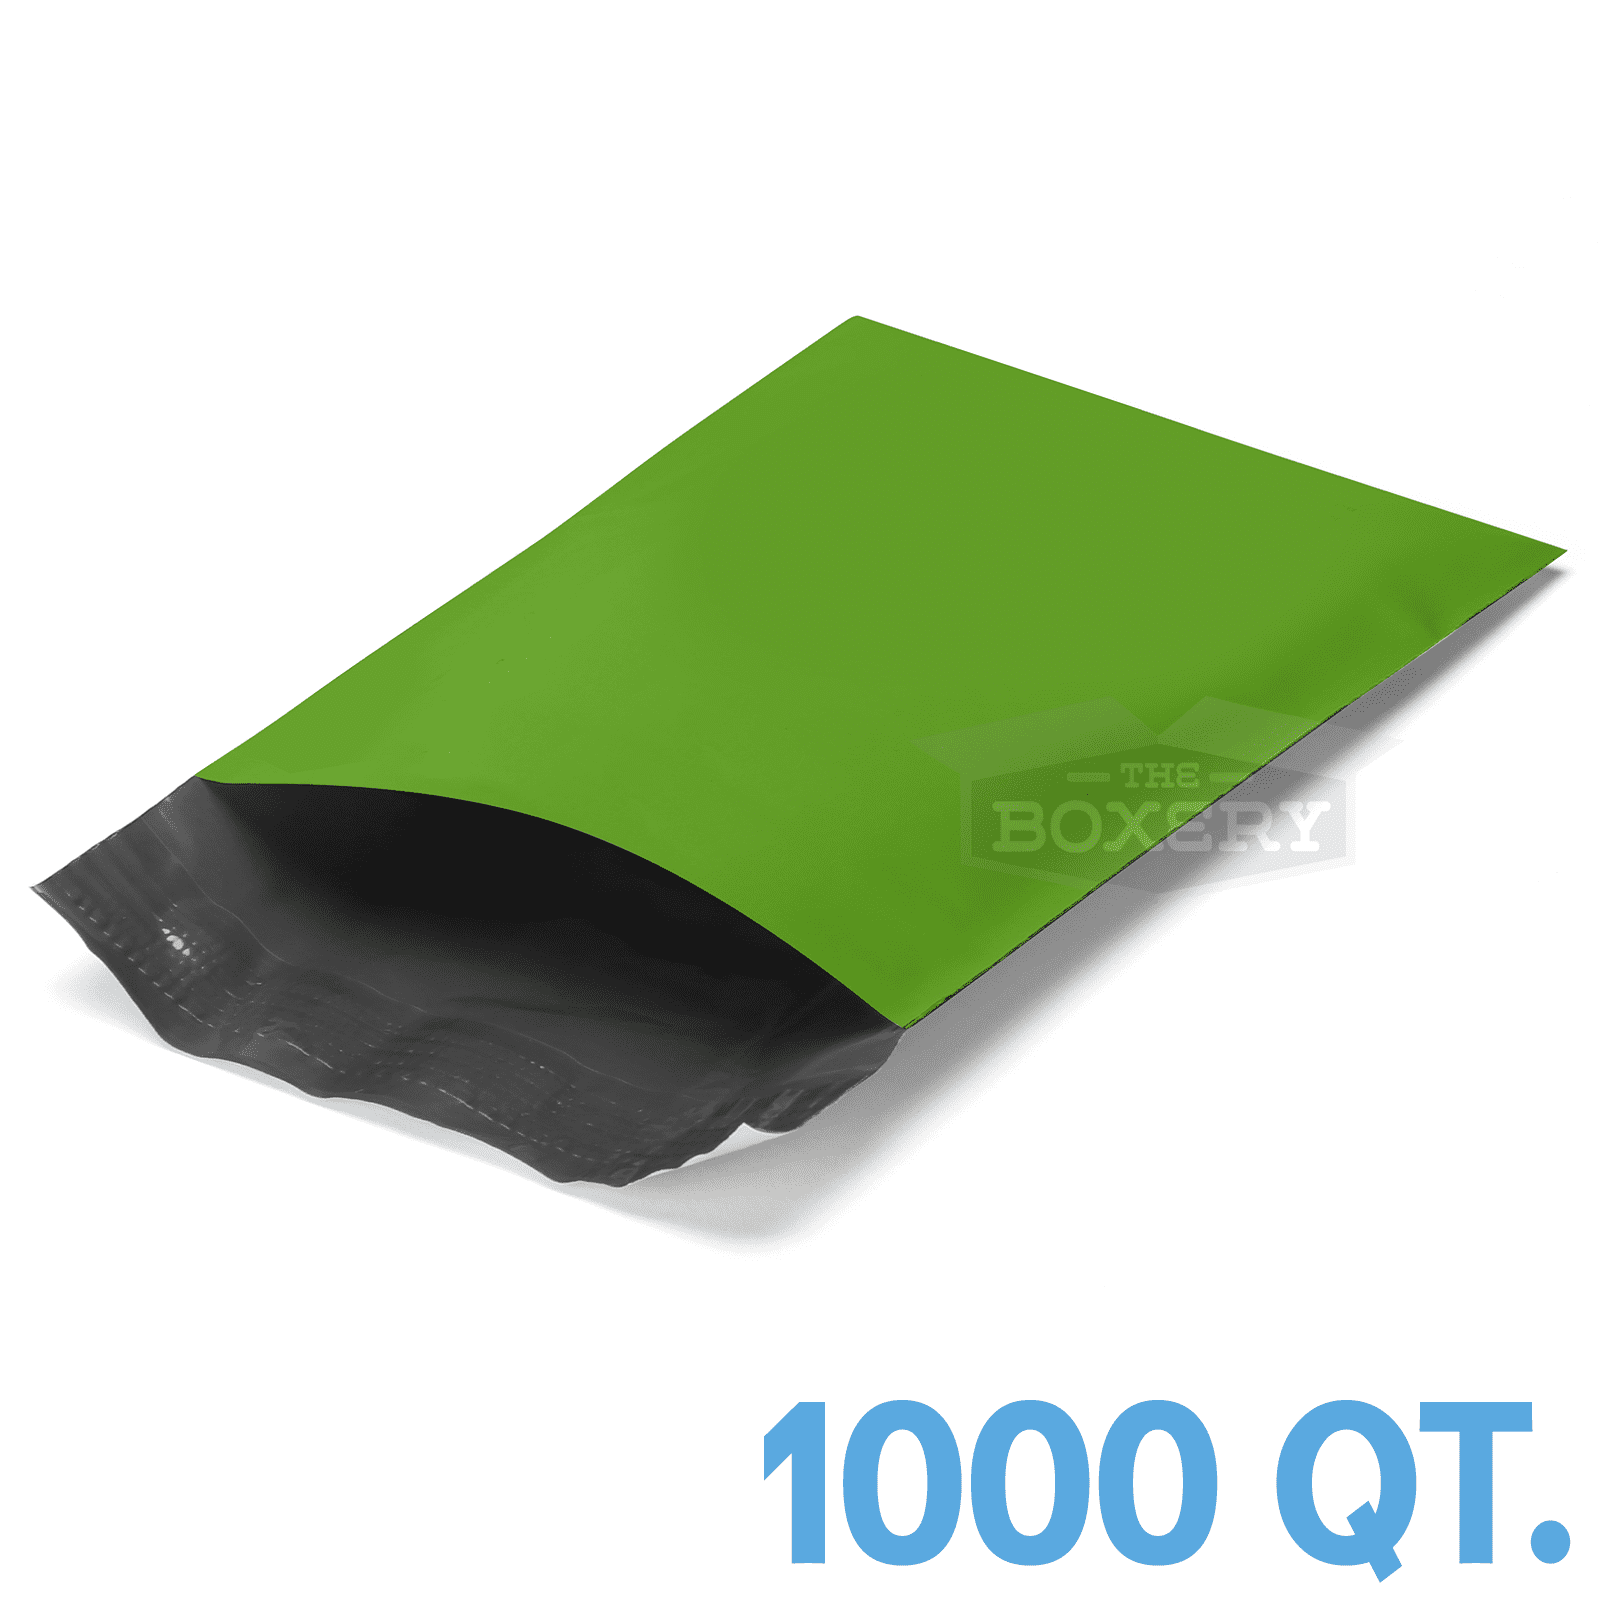 7.5X10.5 ENVELOPE 1000 EA 2000 BAGS POLY MAILERS 10X13 